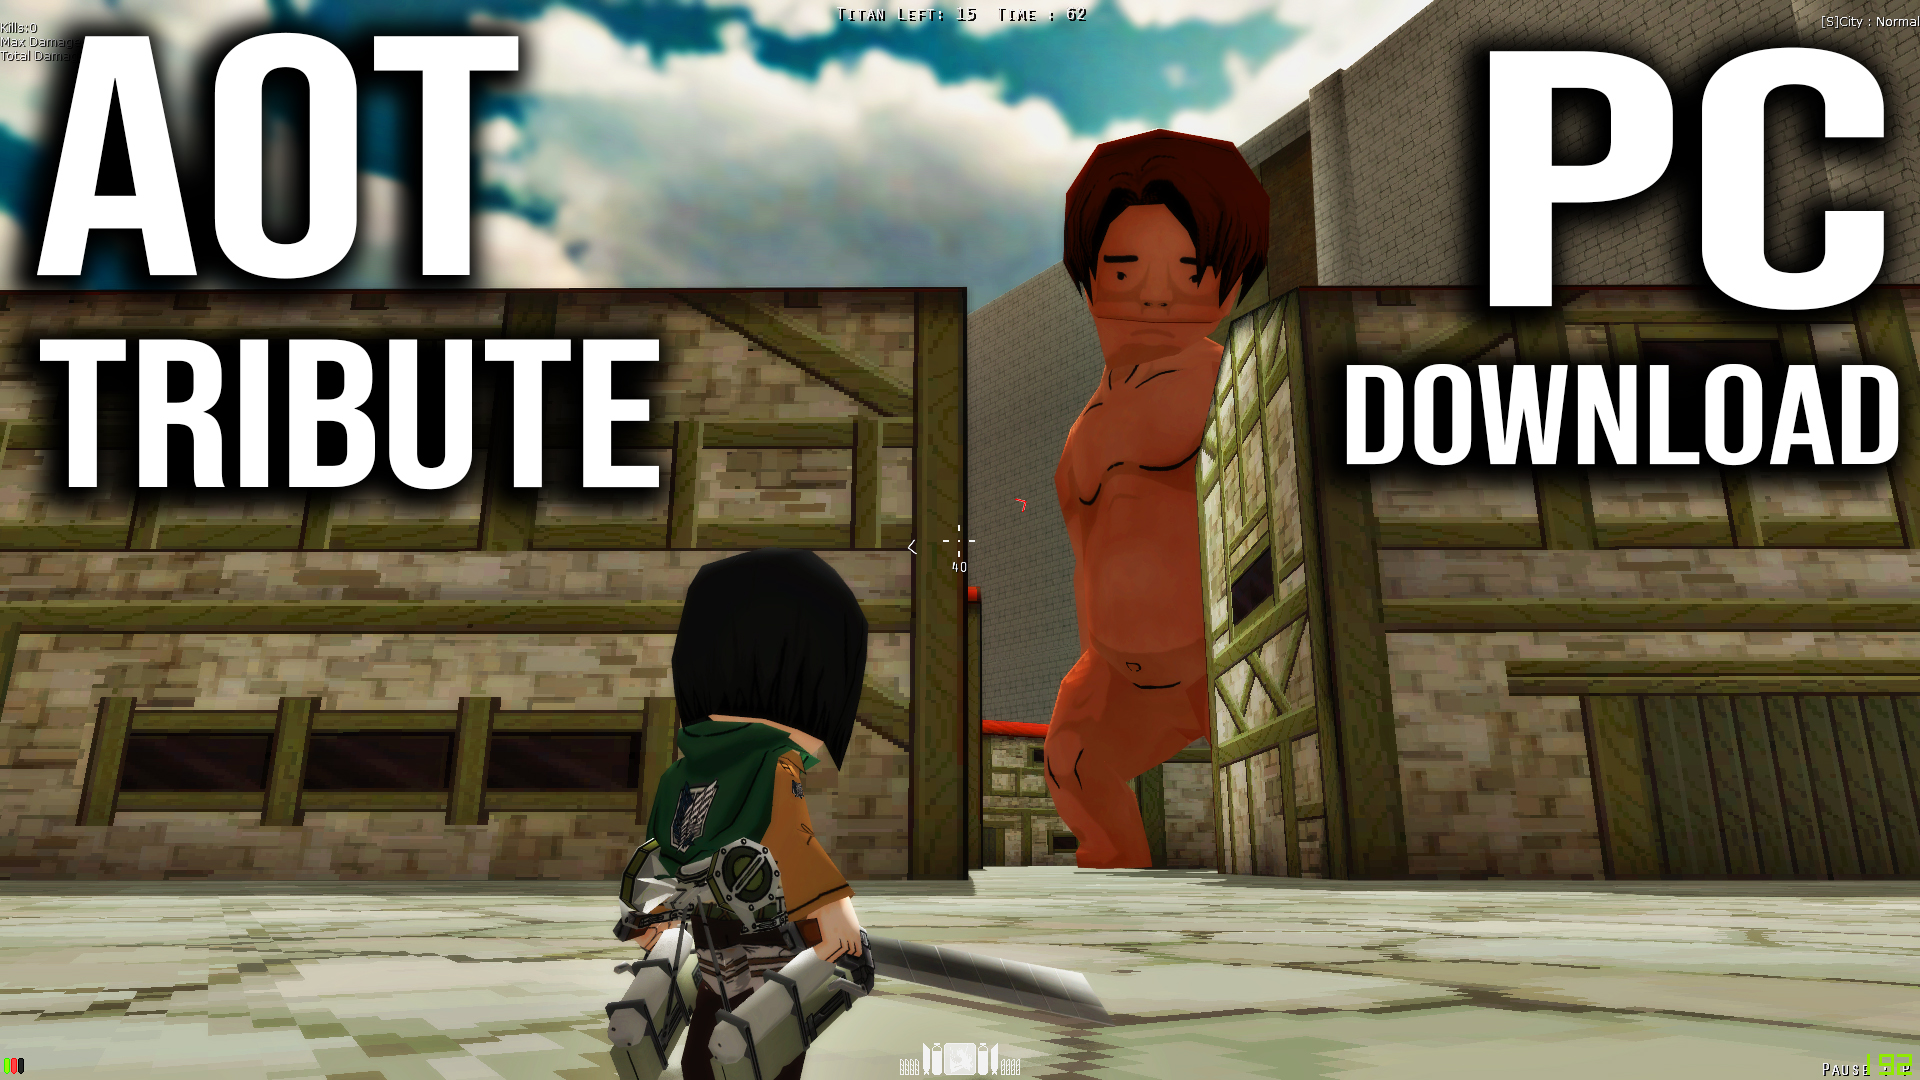 attack on titan tribute game free download